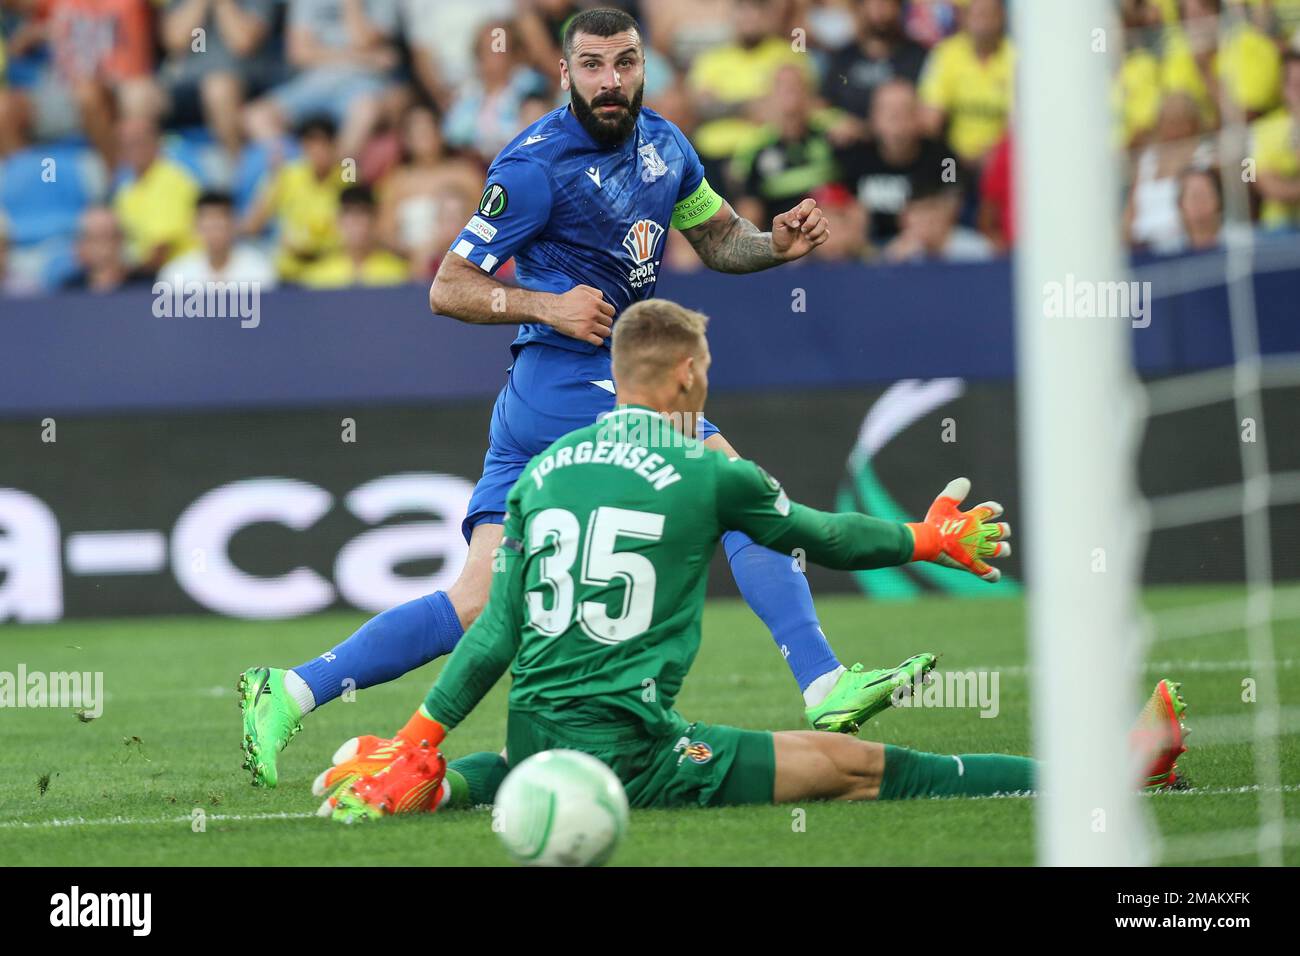 Lech Poznans Mikael Ishak scores his sides third goal during a Group C Europa Conference League soccer match between Villarreal and Lech Poznan at the Ciutat de Valencia stadium in Valencia, Spain,